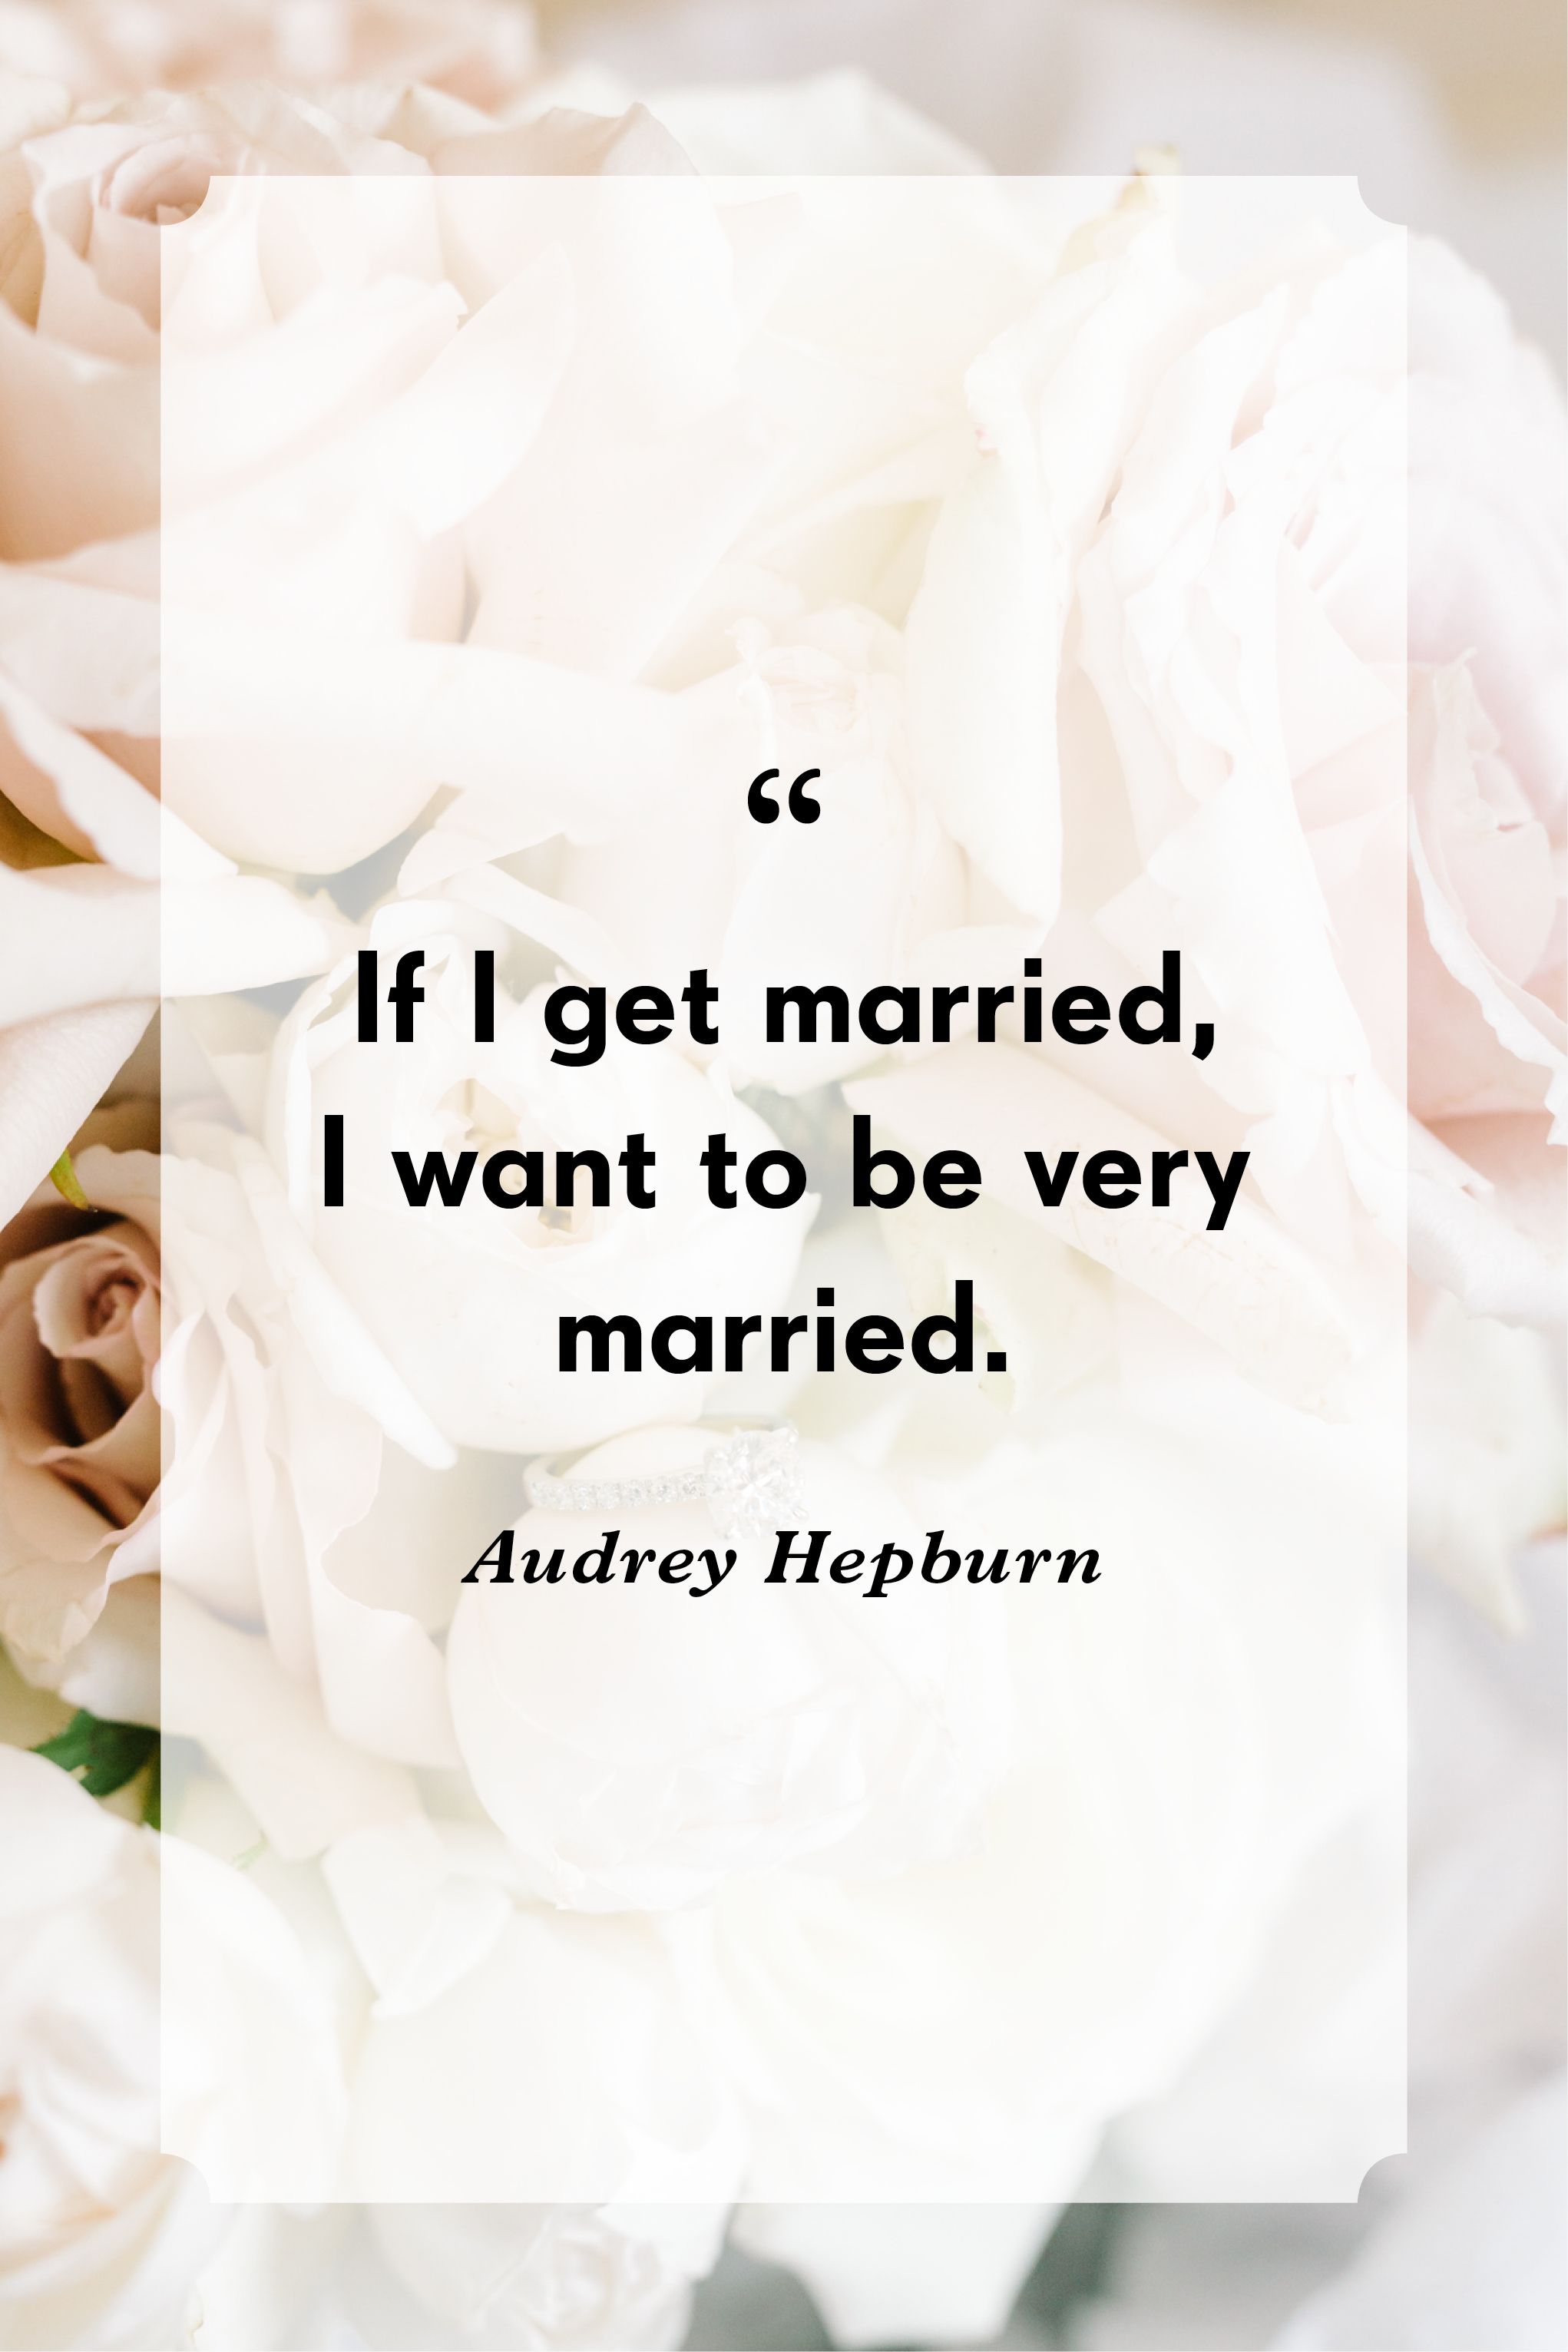 35 Wedding Quotes For Your Big Day The Best Wedding Day Quotes